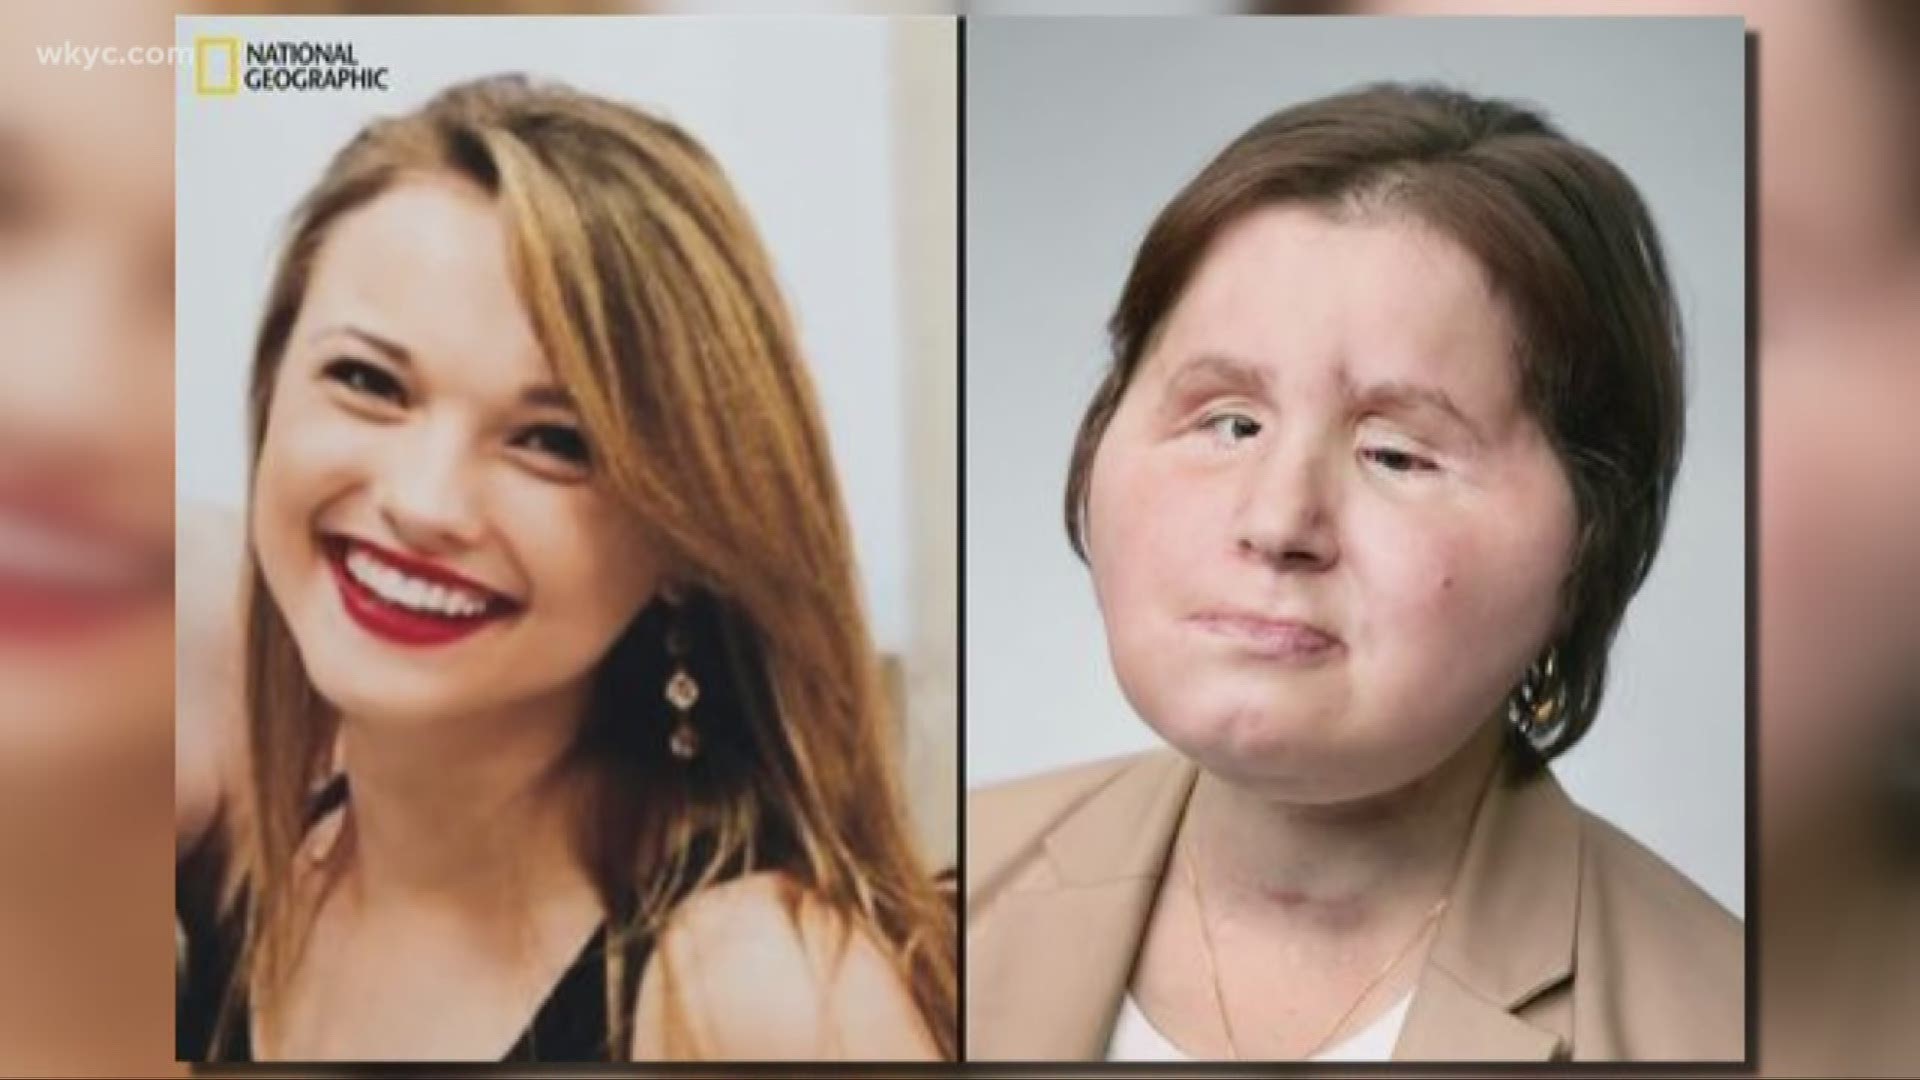 Face transplant recipient gets second chance after failed suicide attempt